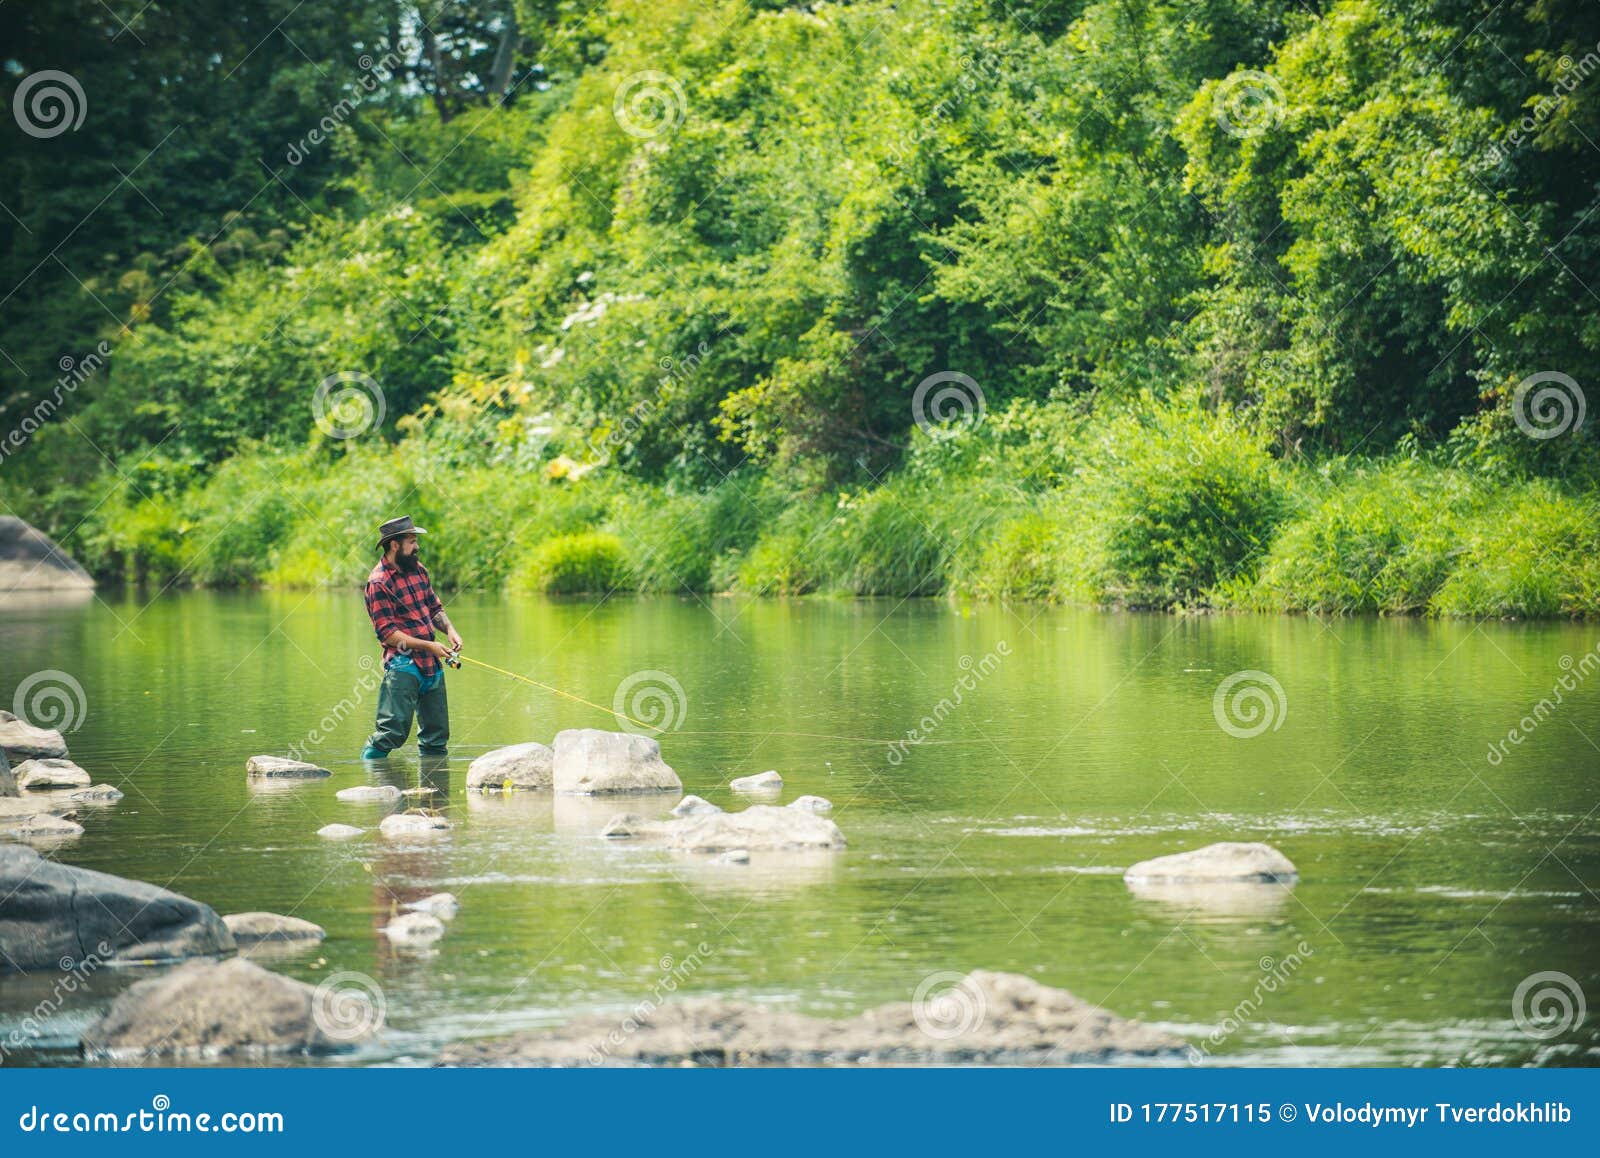 Angler Catching the Fish. Hobby of Real Man. Gone Fishing. Happy Fly Fishing.  Fisher Fishing Equipment Stock Image - Image of hipster, relax: 177517115